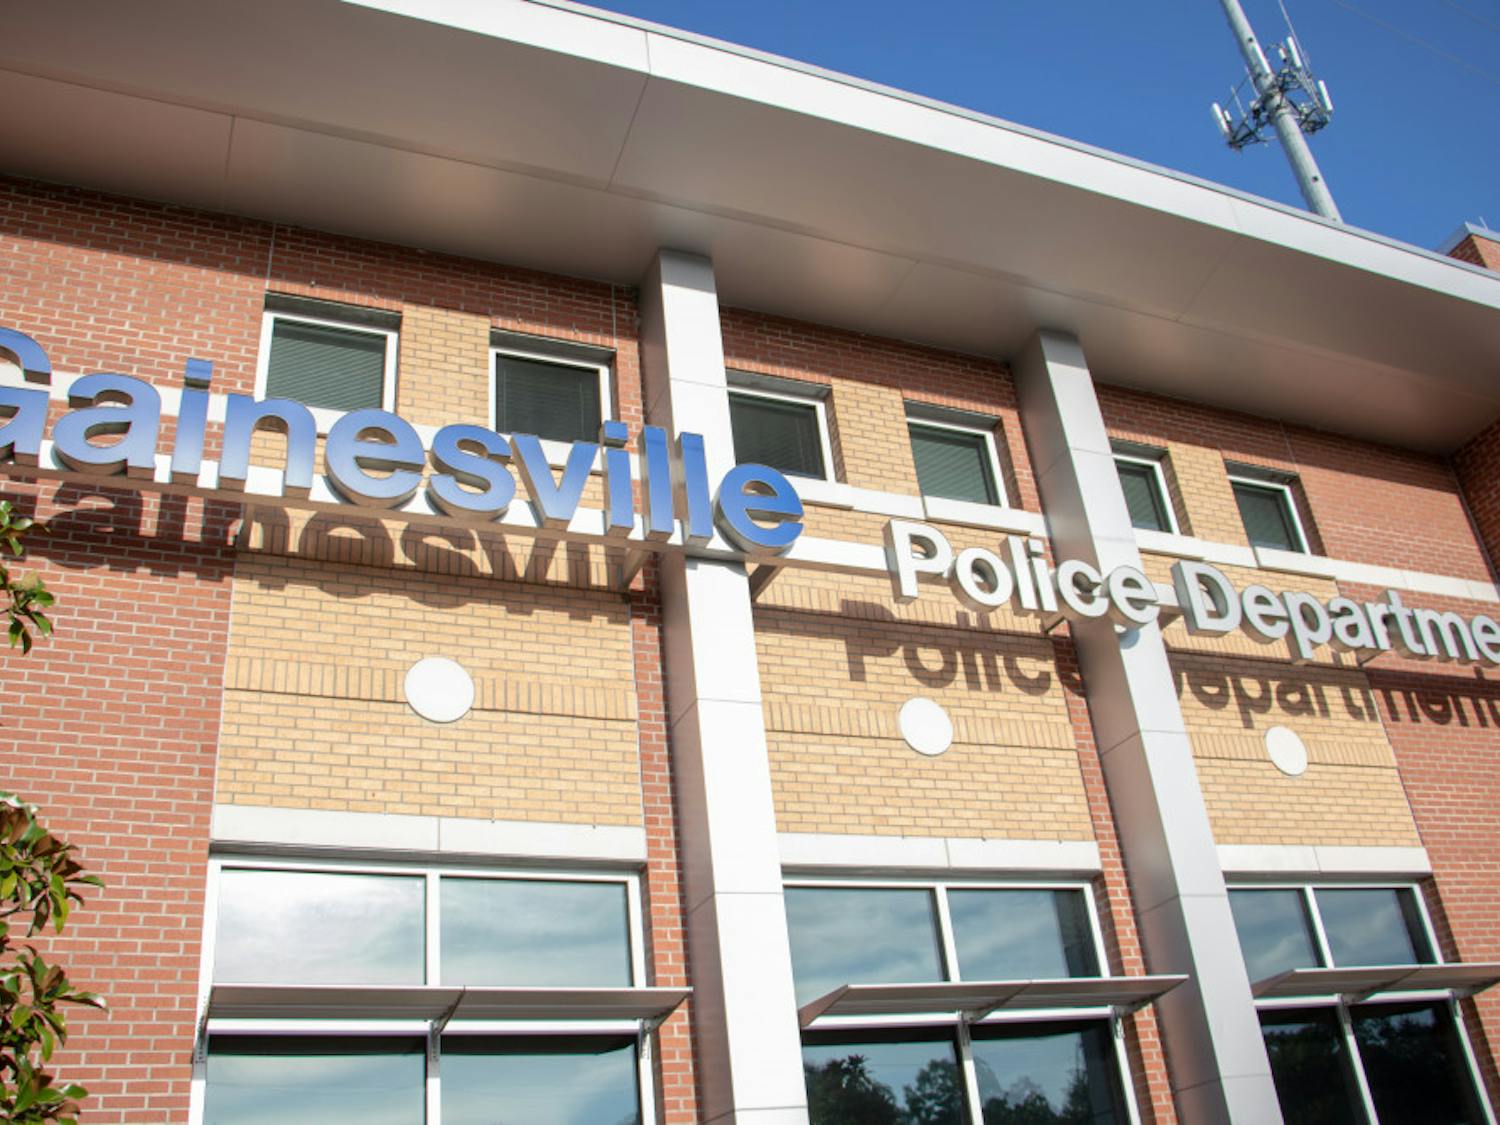 Gainesville Police Department currently has 22 vacancies for officers as contract negotiations for officers on the force are underway. The city and police union are meeting today, and salaries and benefits are on the table.